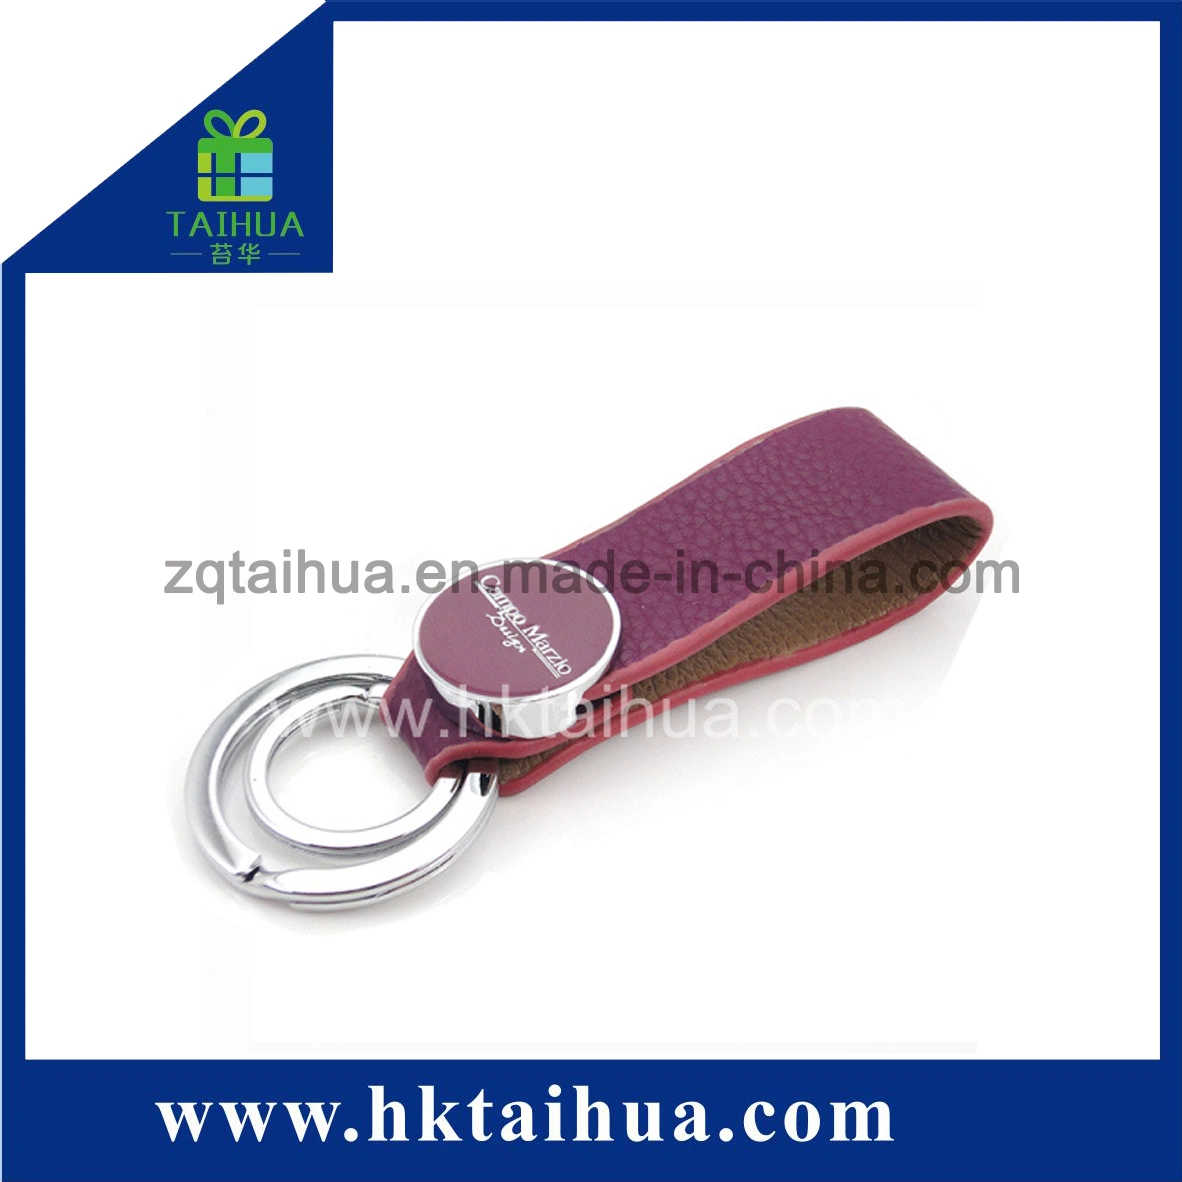 Promotion Gift with Leather Key Chains